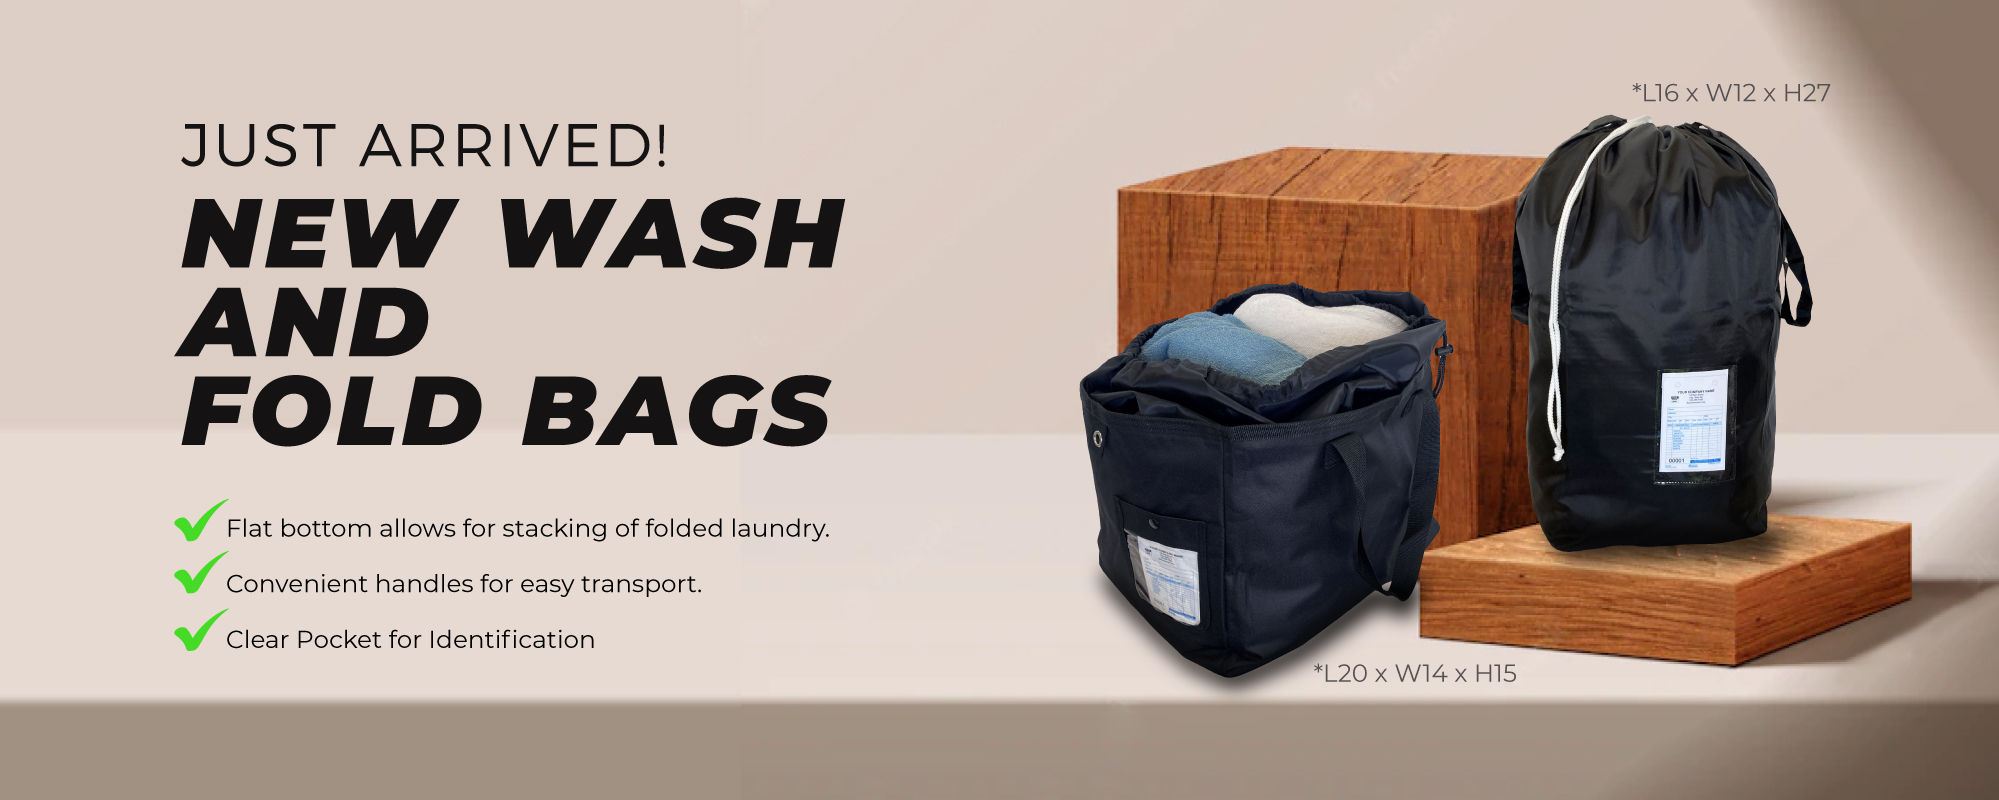 Wash and Fold Bags at LaundryBags.com